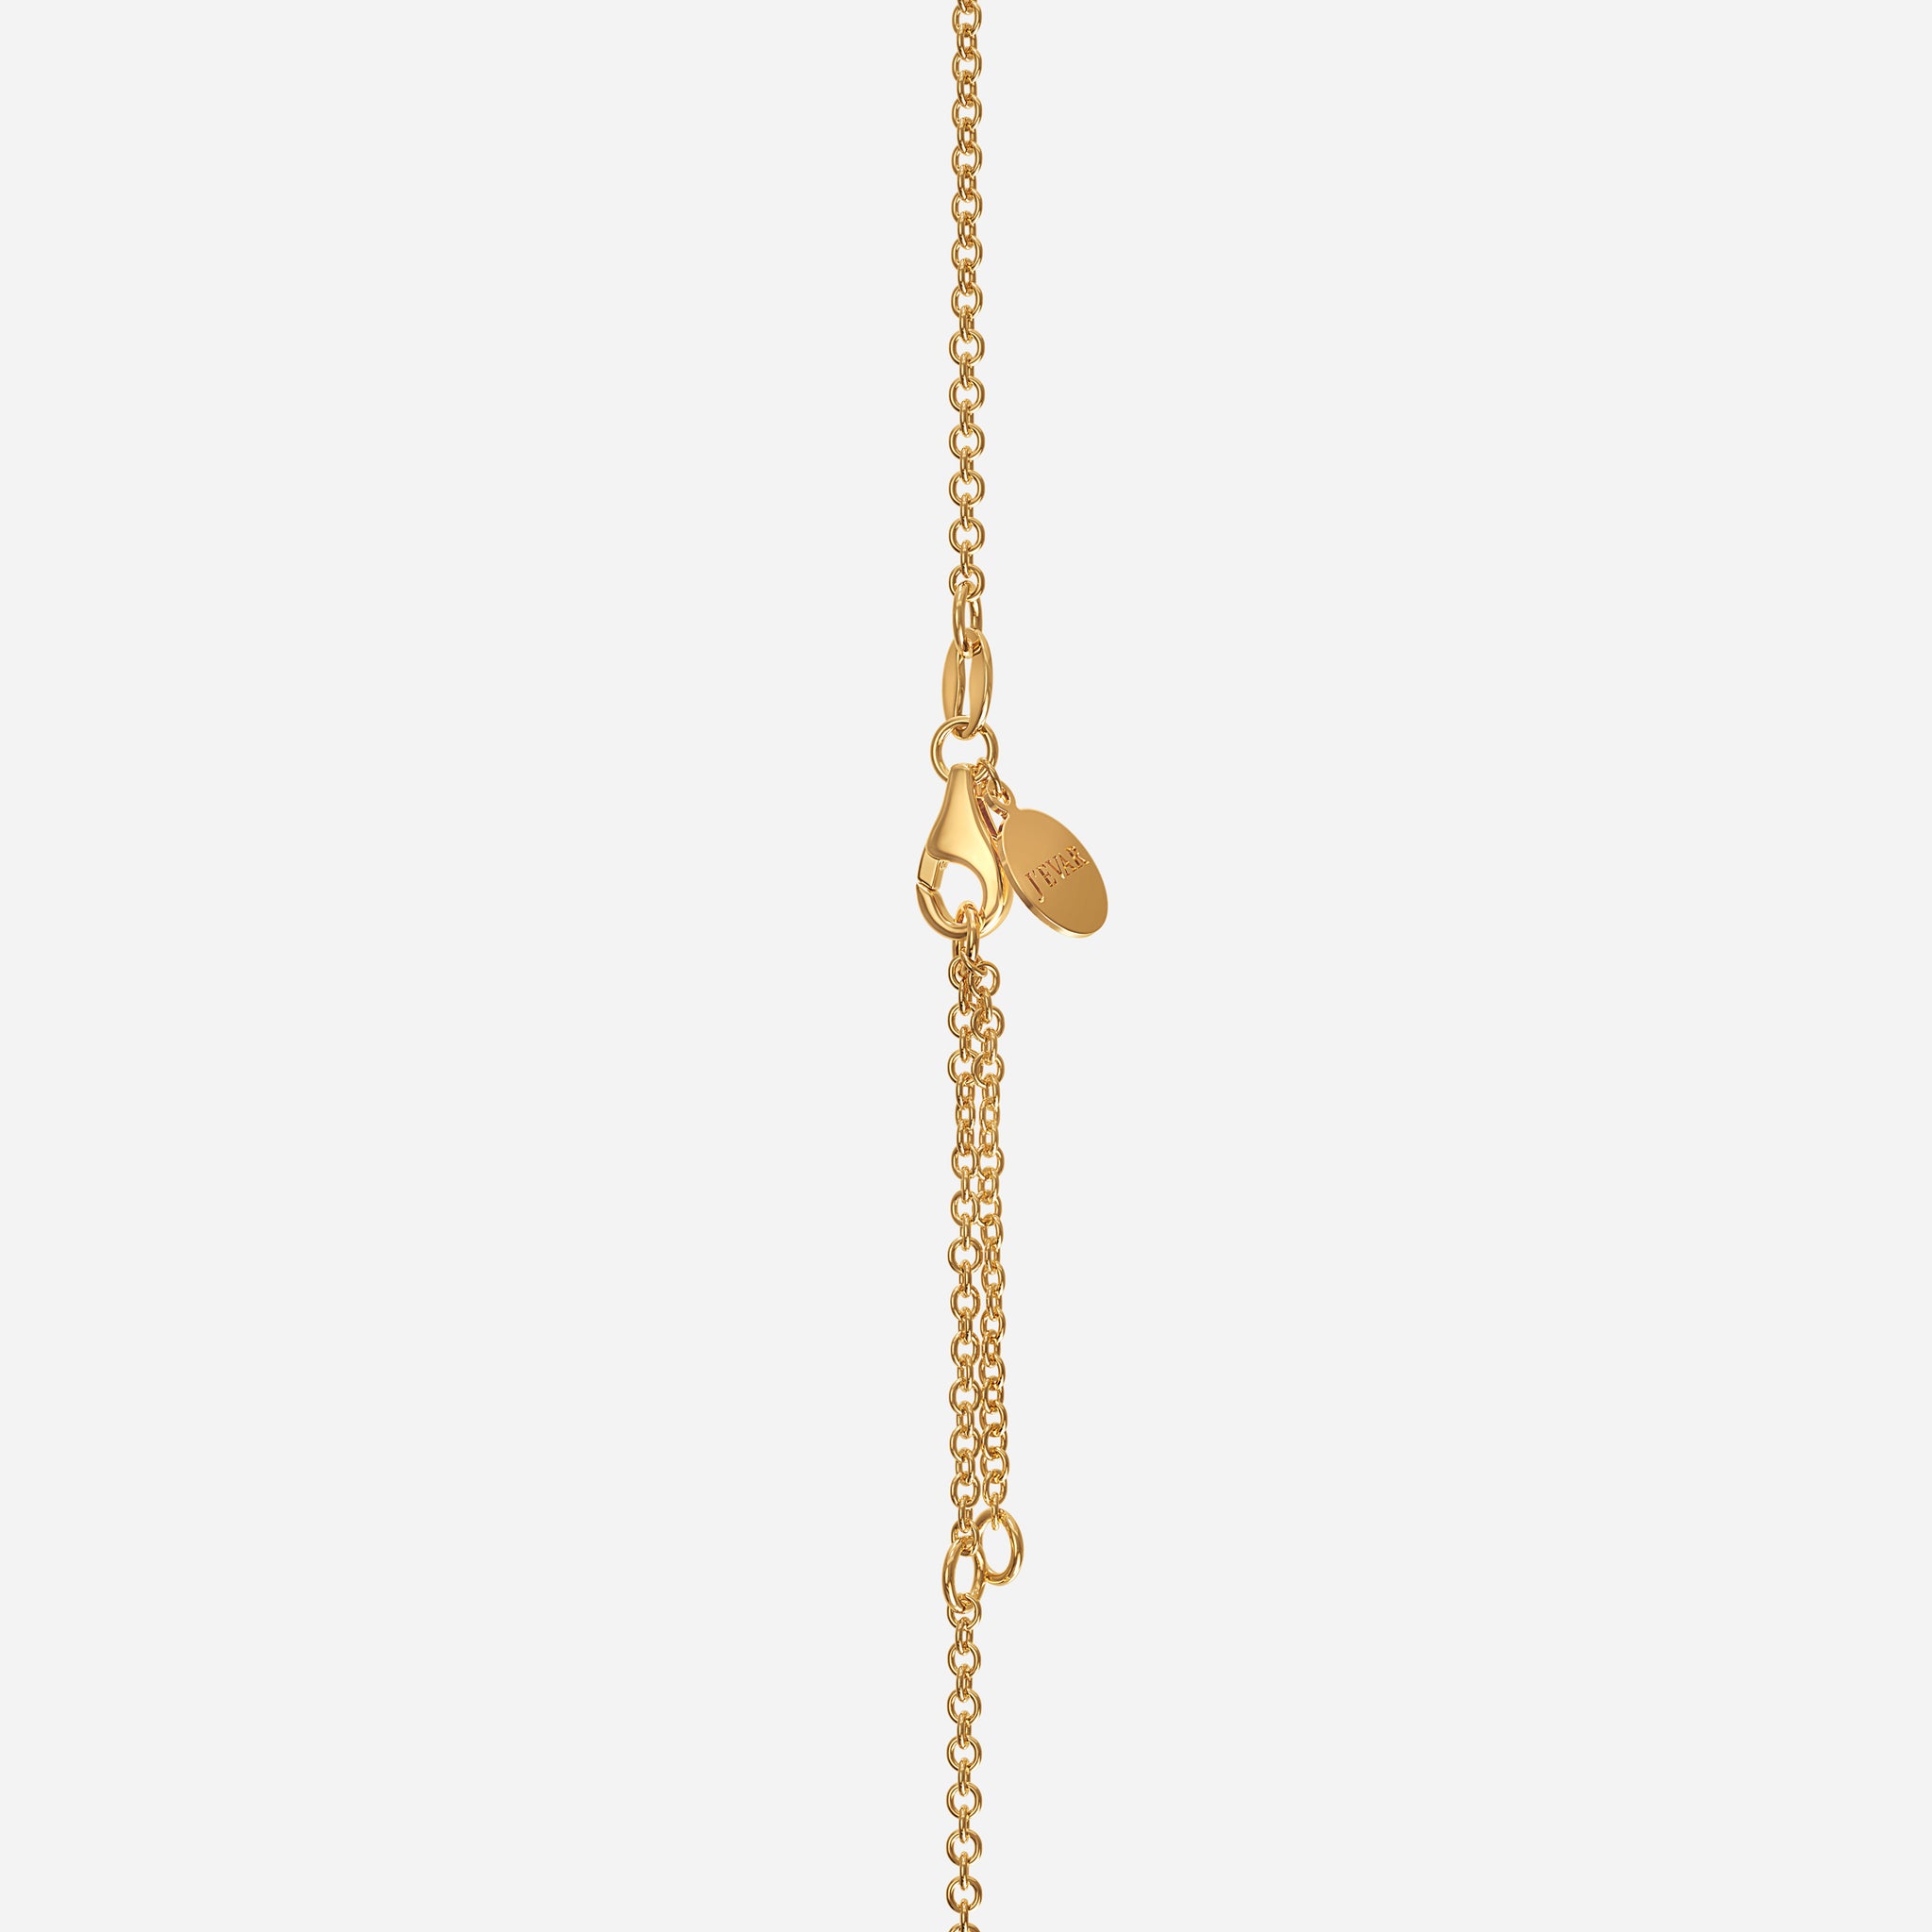 J'EVAR 14KT Yellow Gold By The Yard ALTR Lab Grown Diamond Necklace Lock View